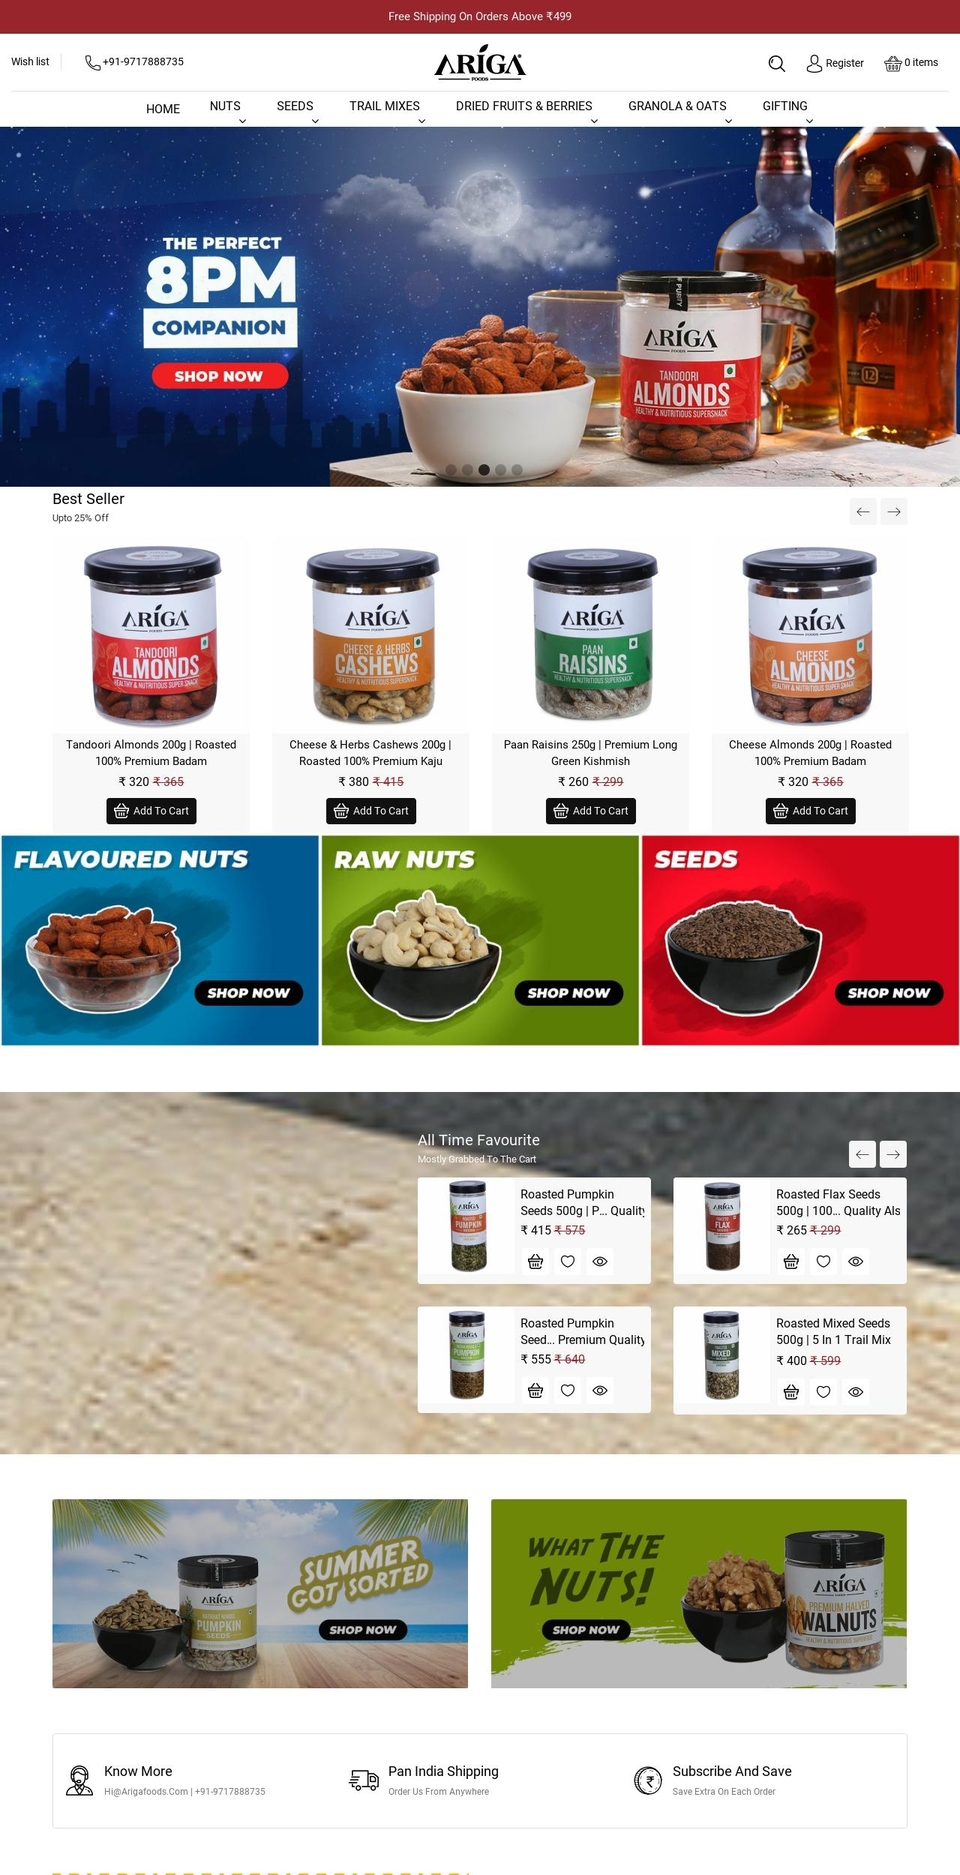 Flavoro Shopify theme site example arigafoods.com